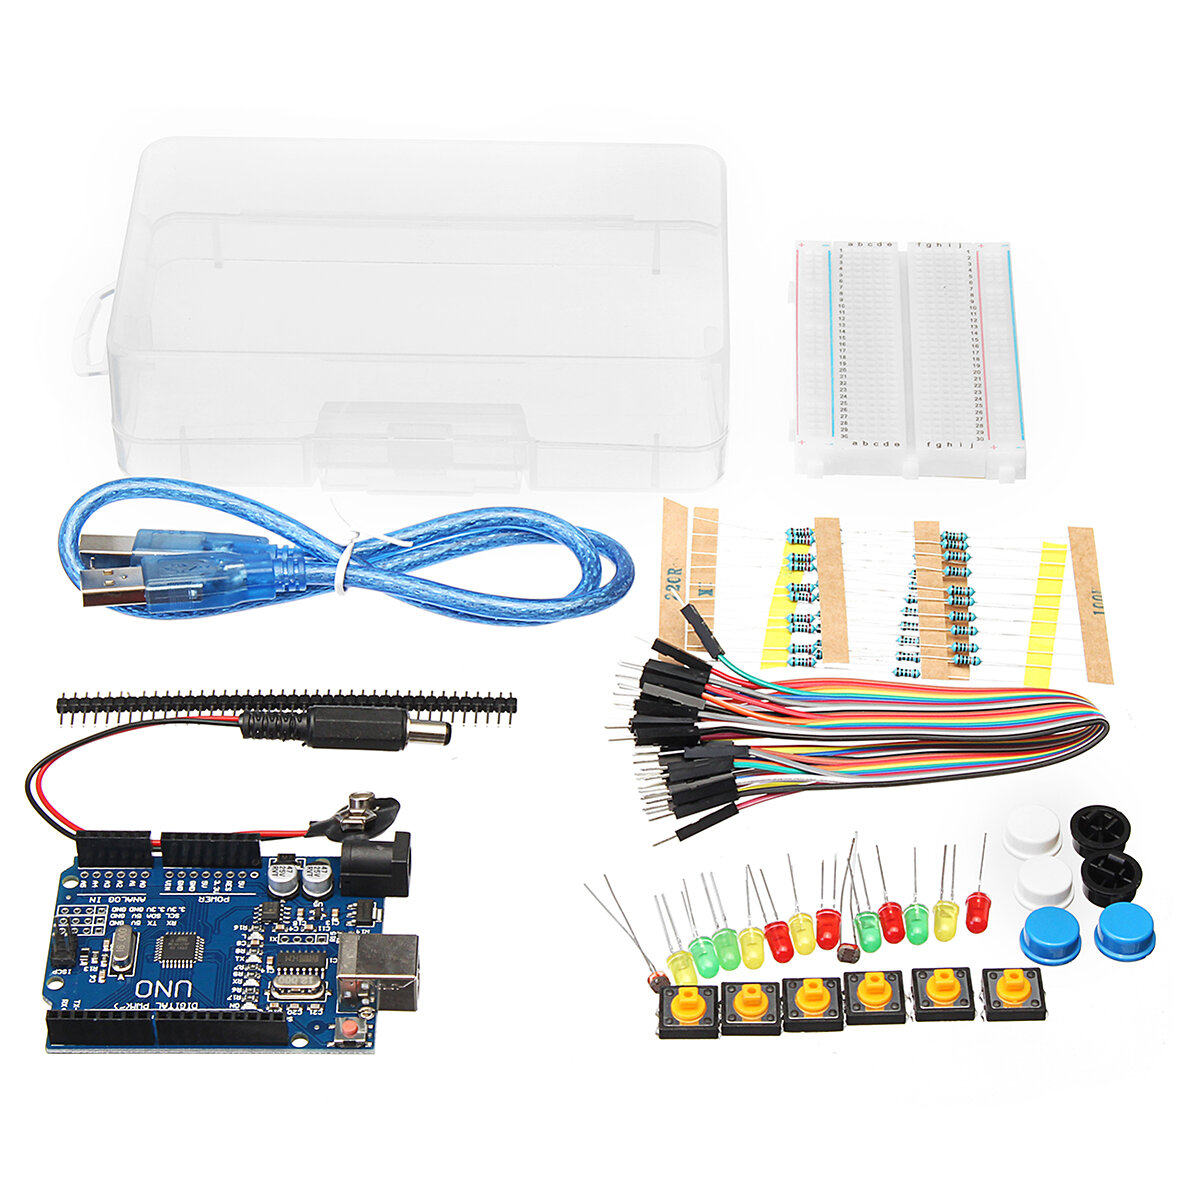 New Basic Starter Kit UNO R3 Breadboard LED Jumper Wire Cable for Arduino 